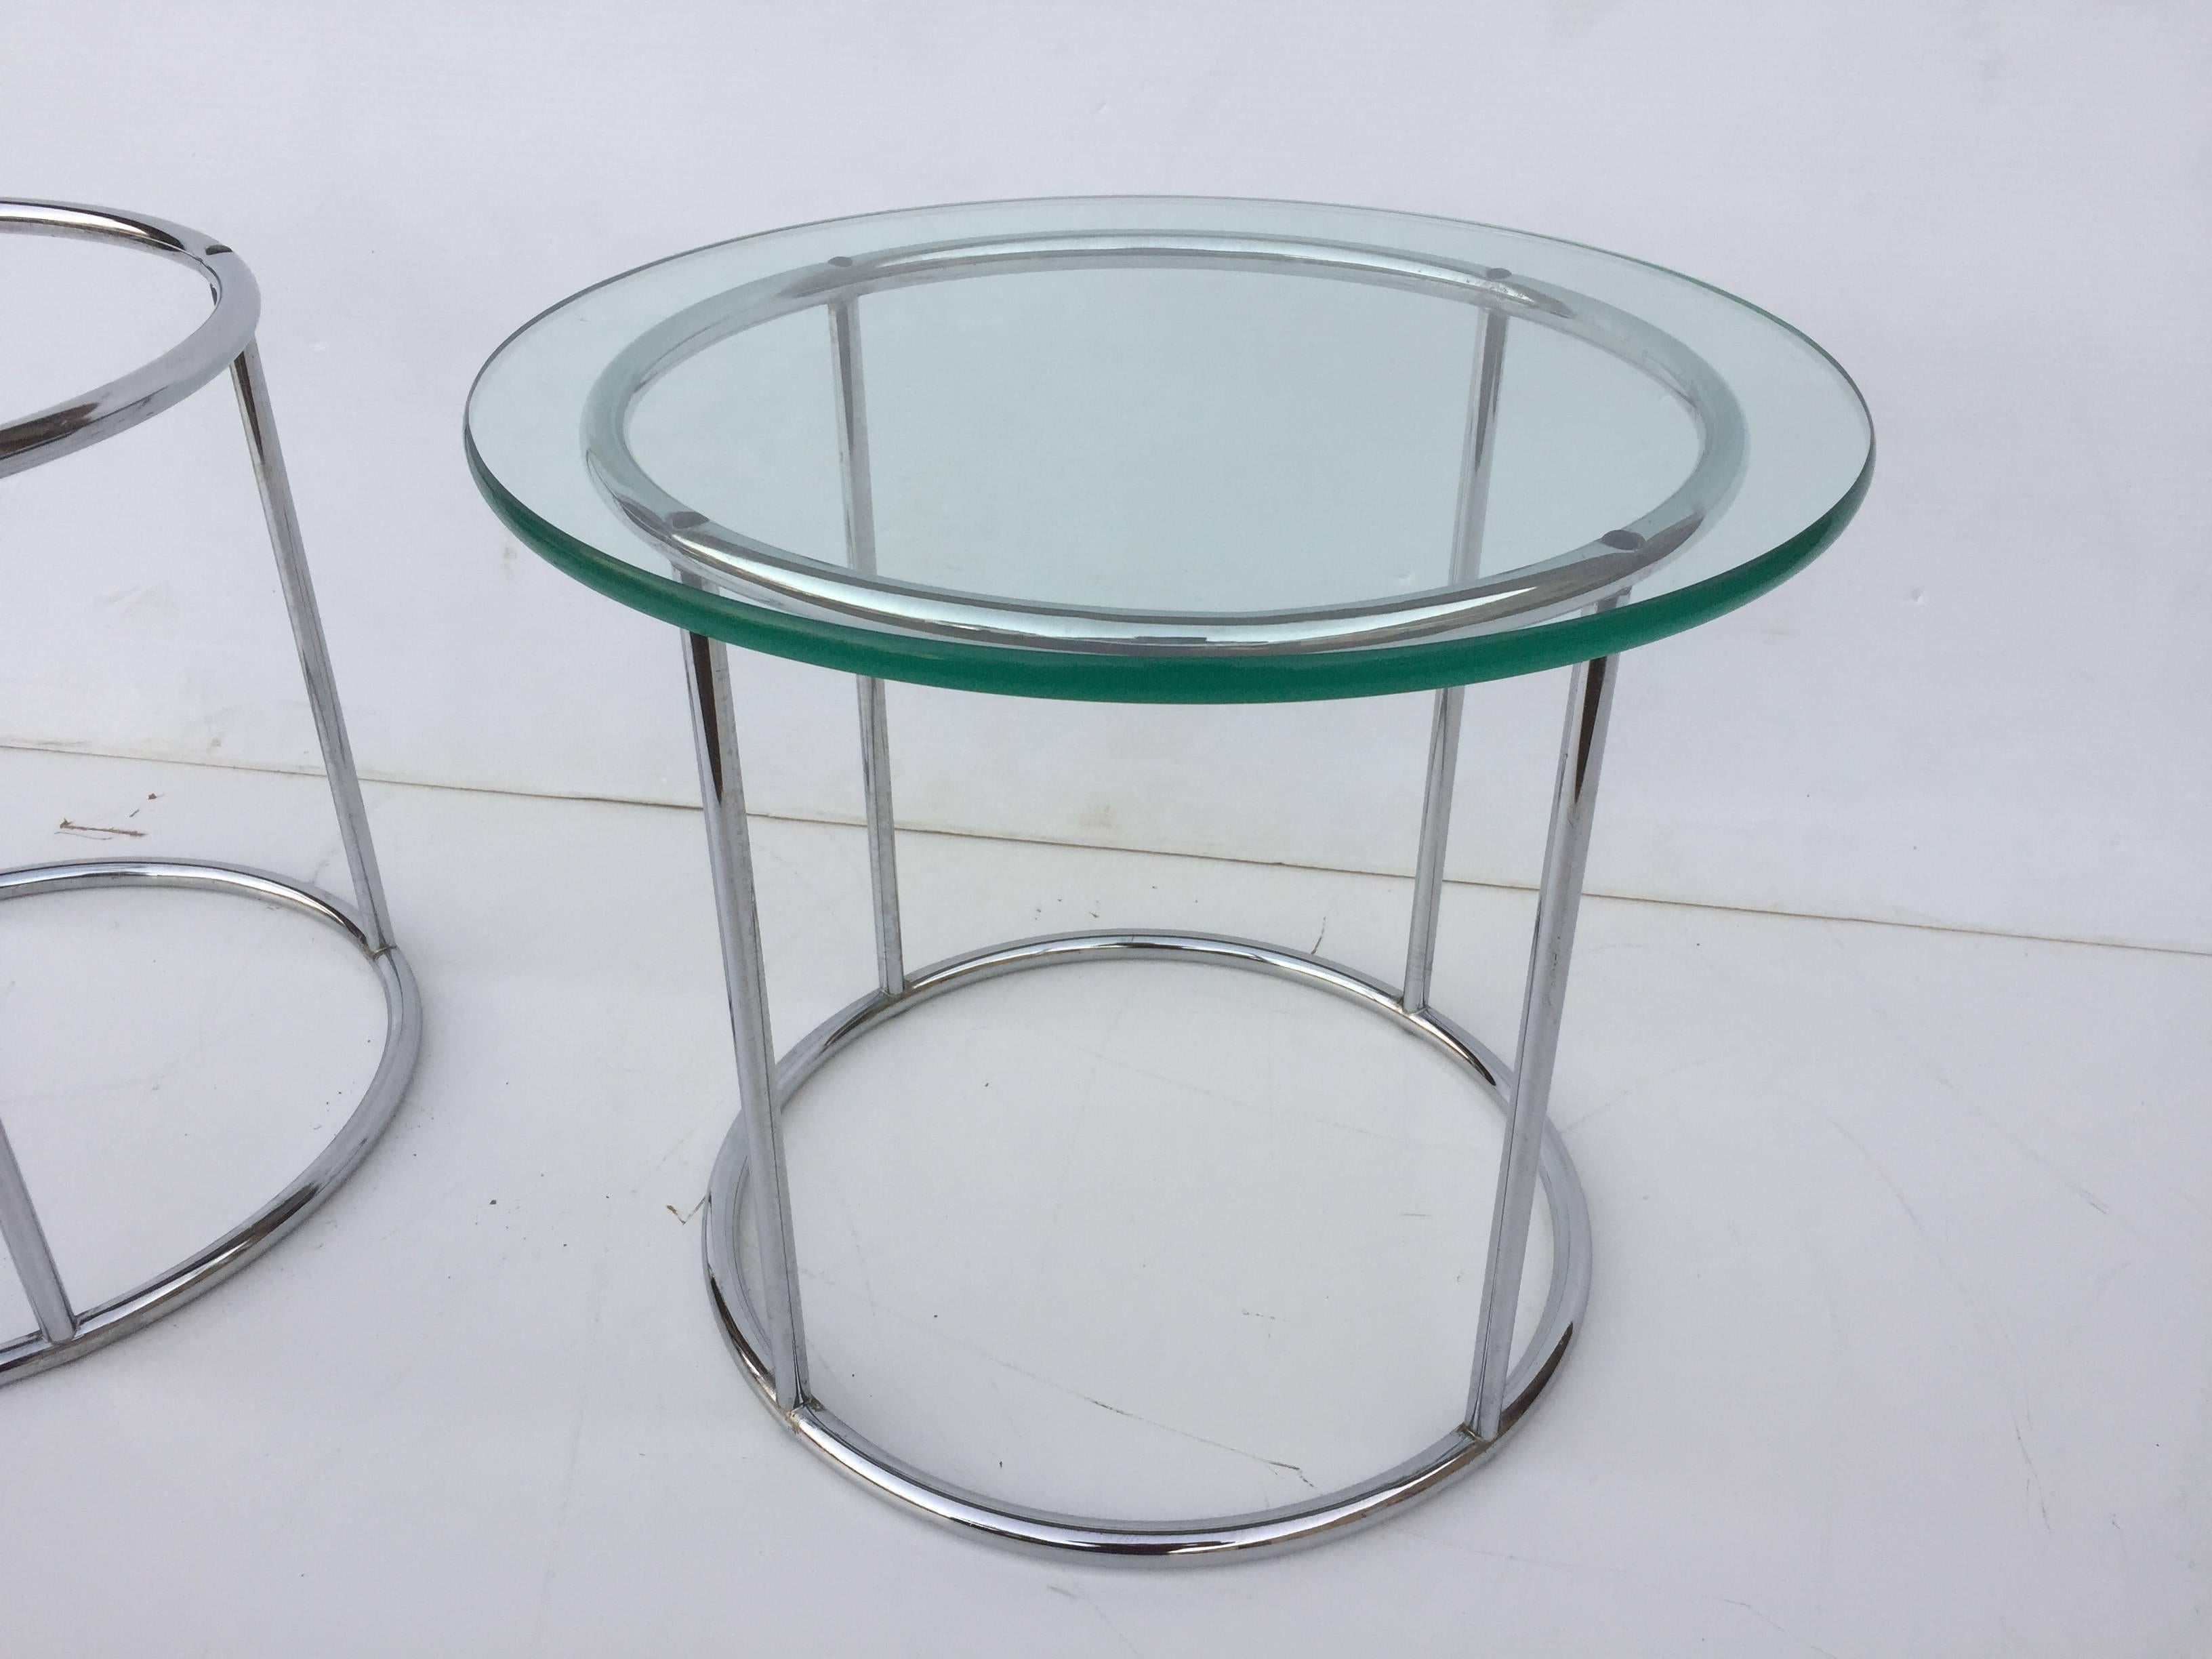 Pair of petite four post circular chrome frame side tables in the manner of Milo Baughman.